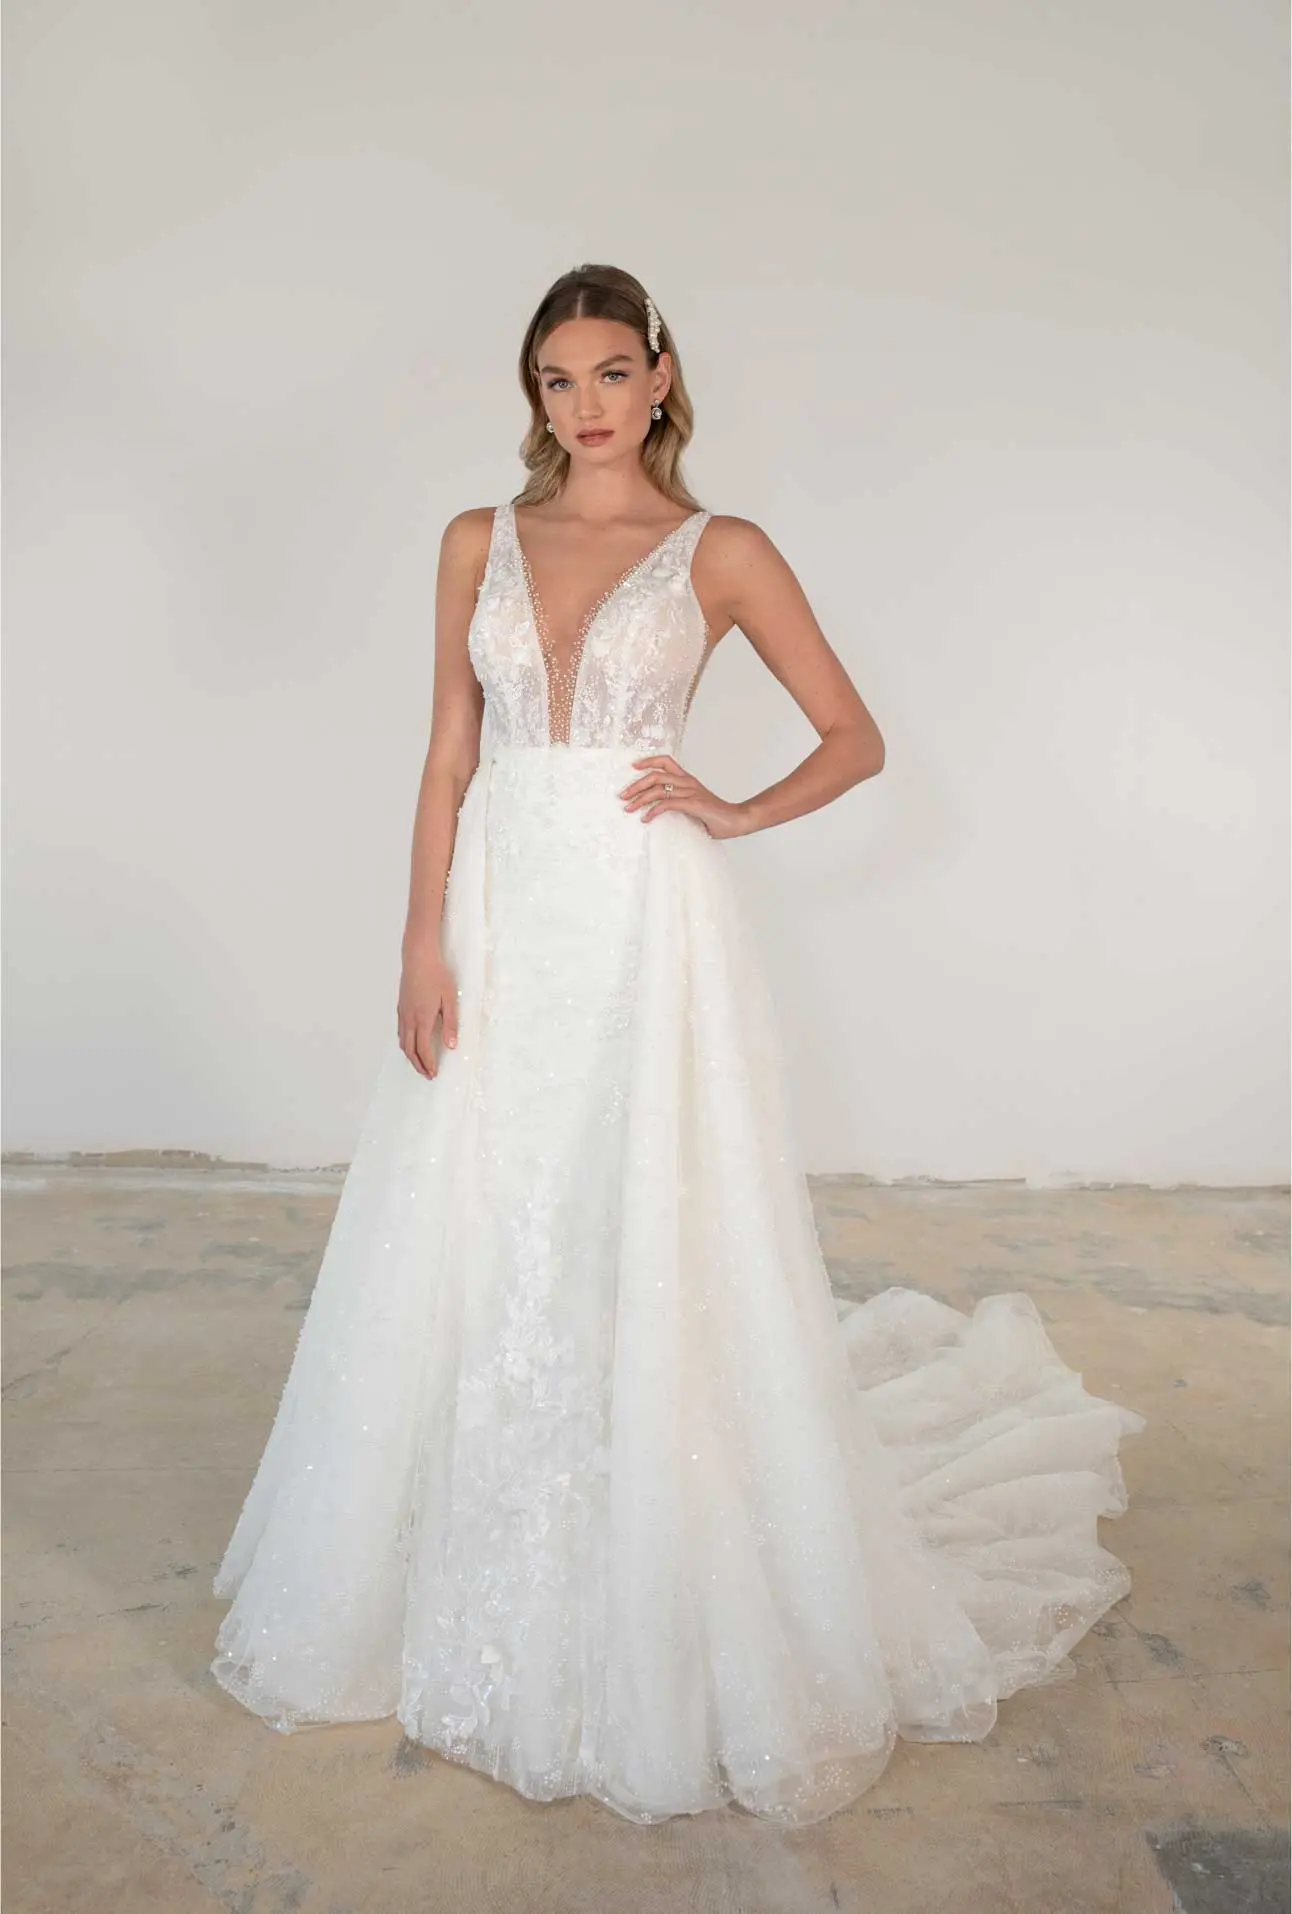 Modern Beaded Sheath Gown With Detachable Overskirt by Martina Liana Luxe